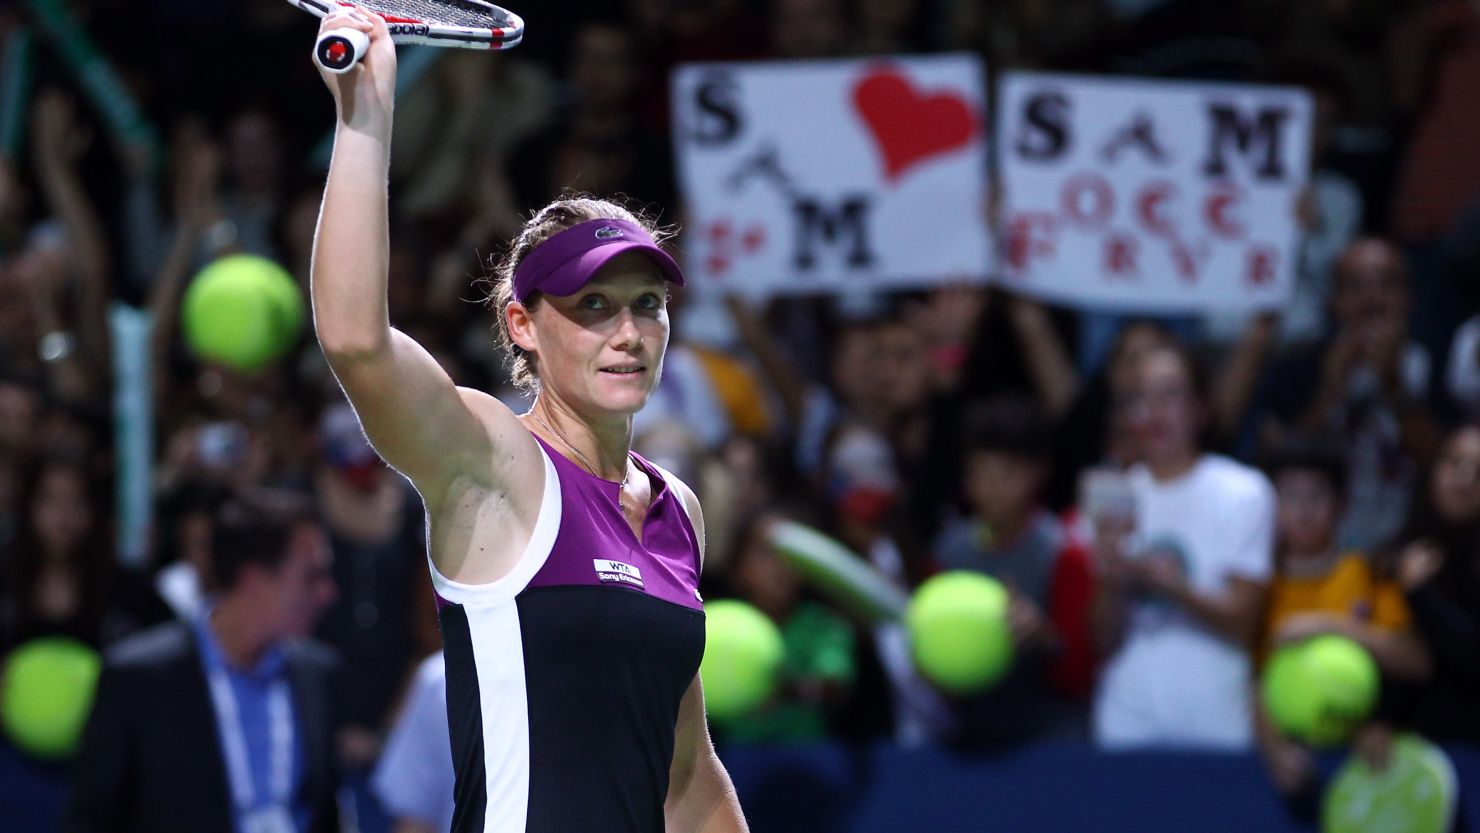 Australia's Samantha Stosur clinched her first grand slam by winning the U.S. Open in September.